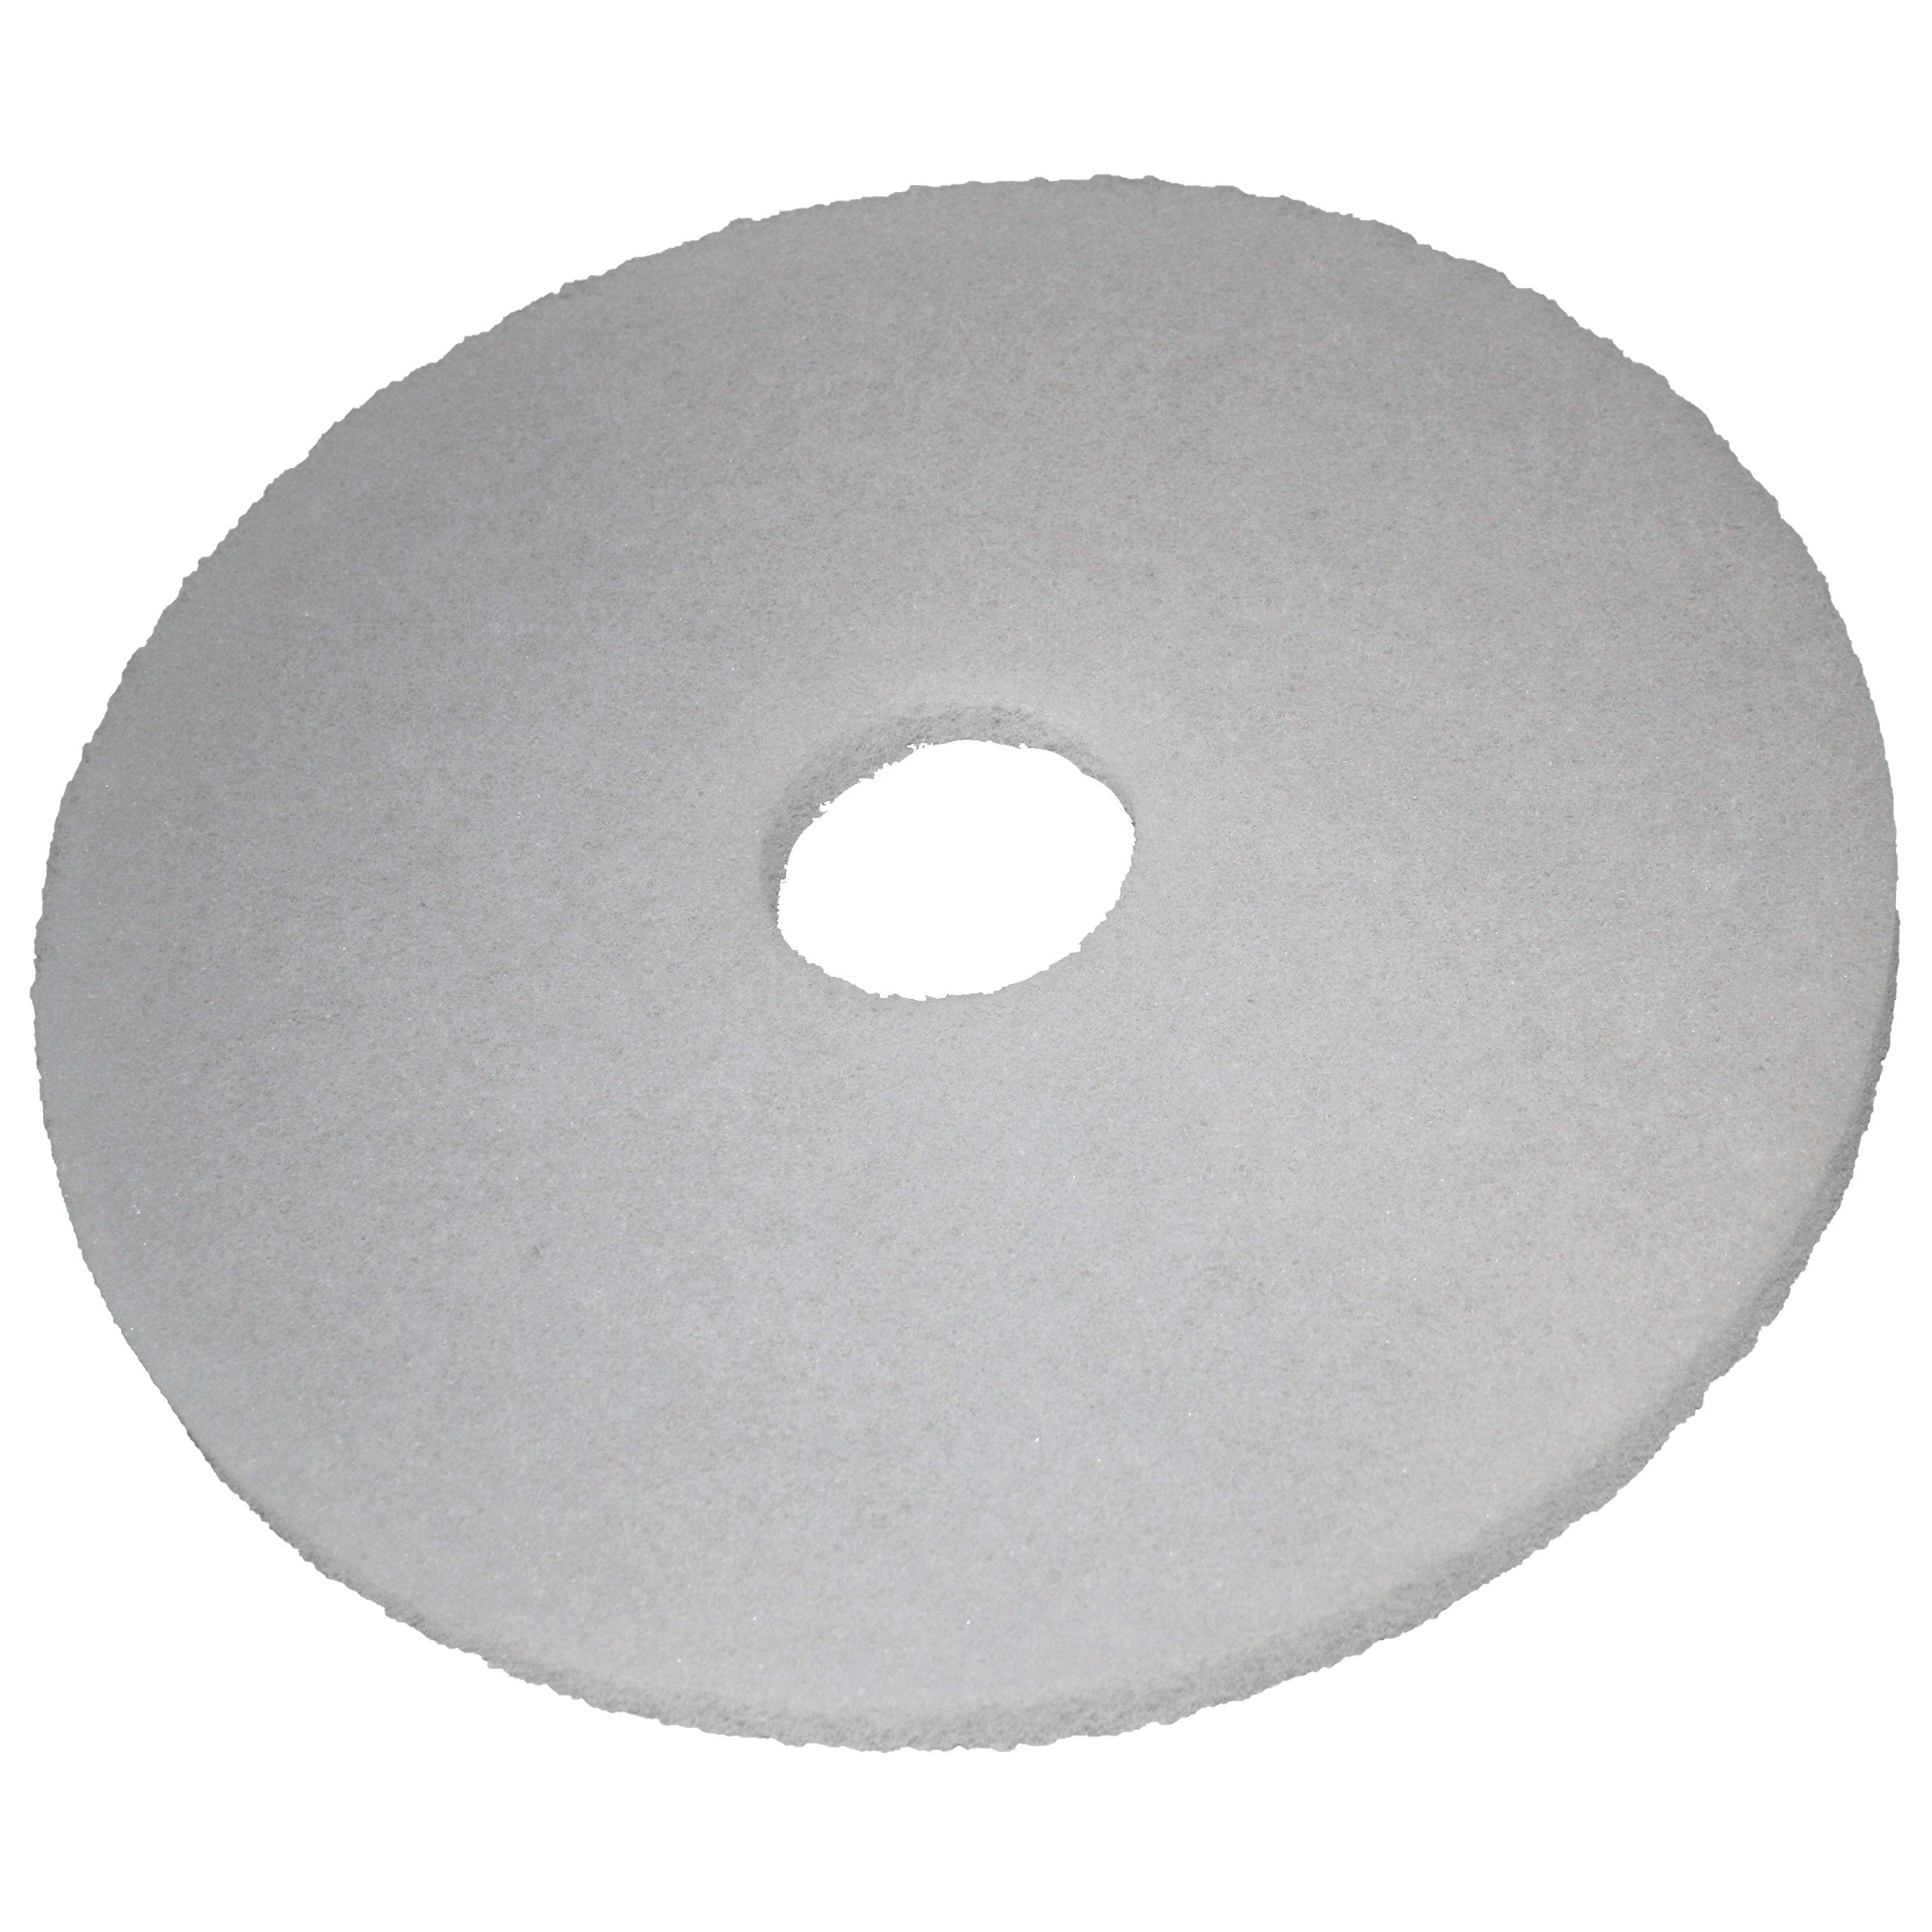 Pad weiss, Ø 330 mm, Polyester